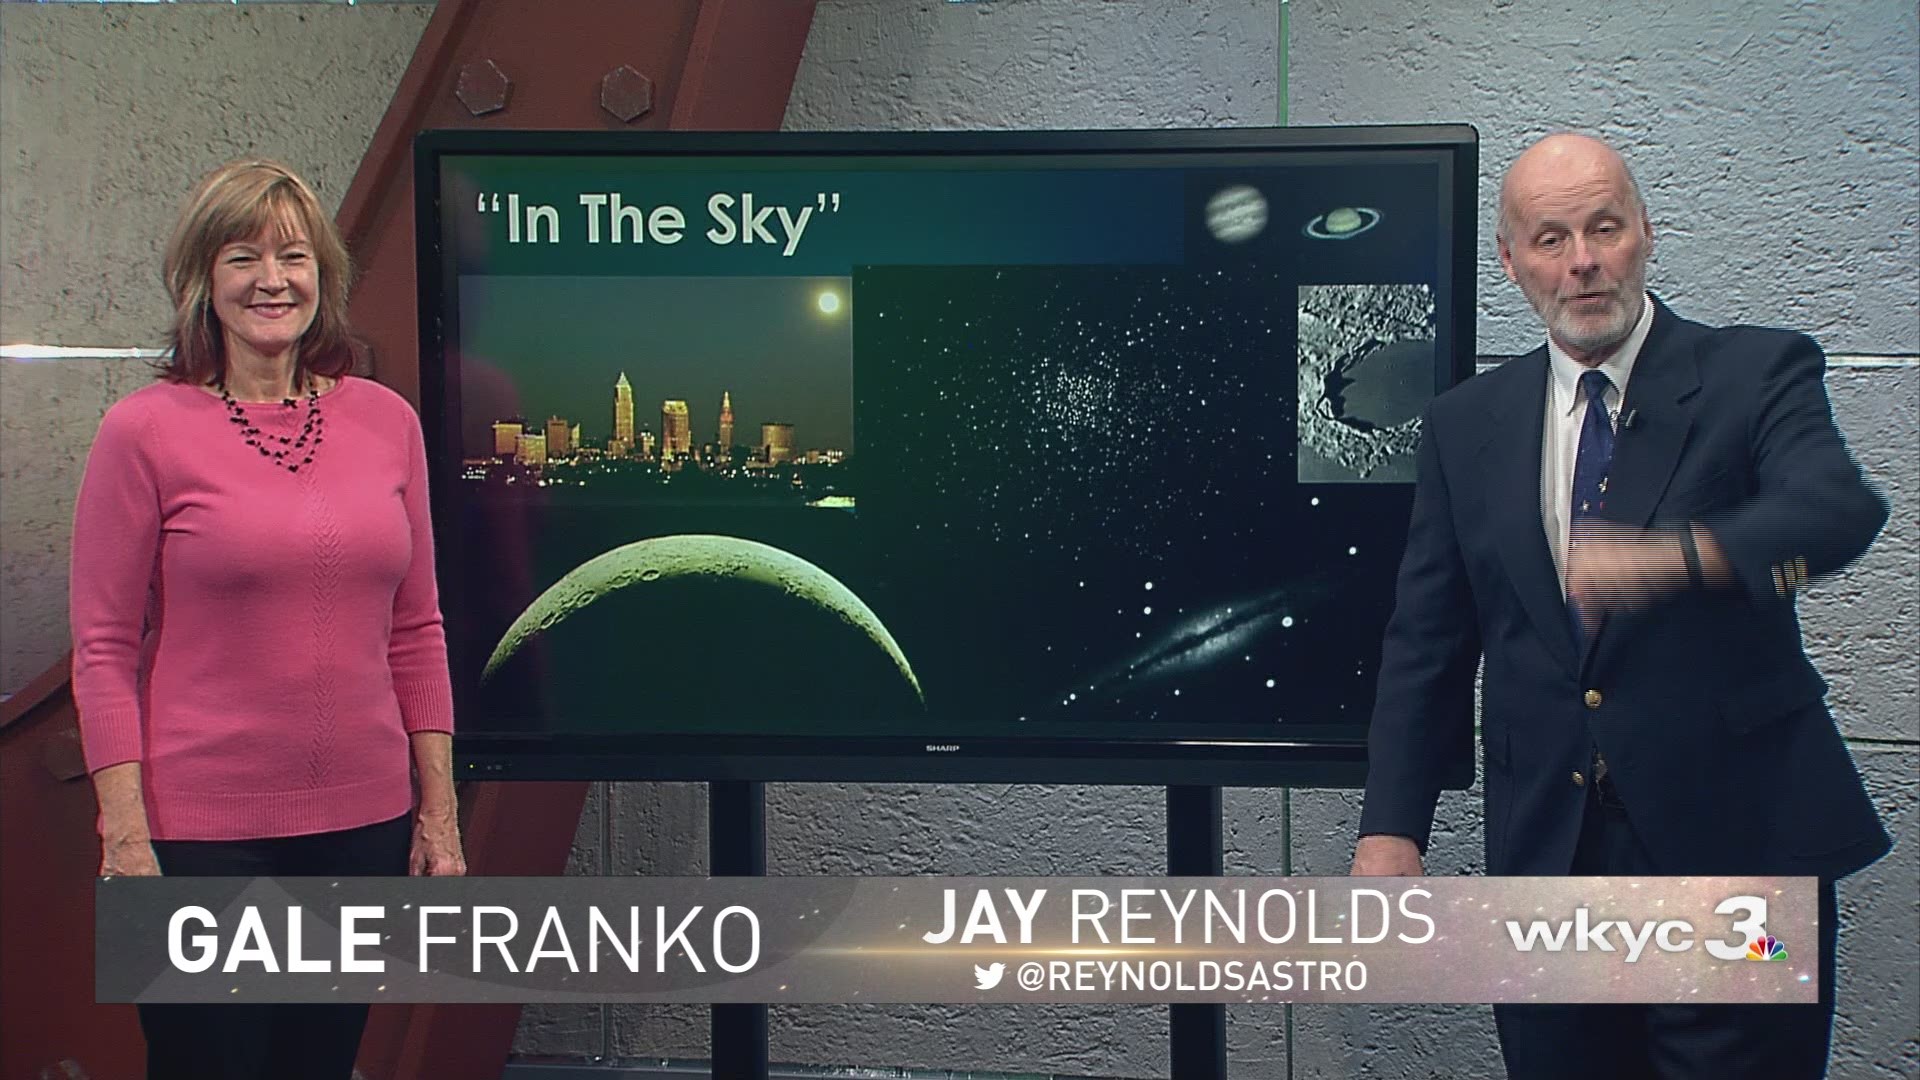 ay Reynolds (@reynoldsastro) from CSU and Gale Franko from the Cuyahoga Astronomical Association (@CuyAstro) are back for our December edition of "In the Sky". #3weather